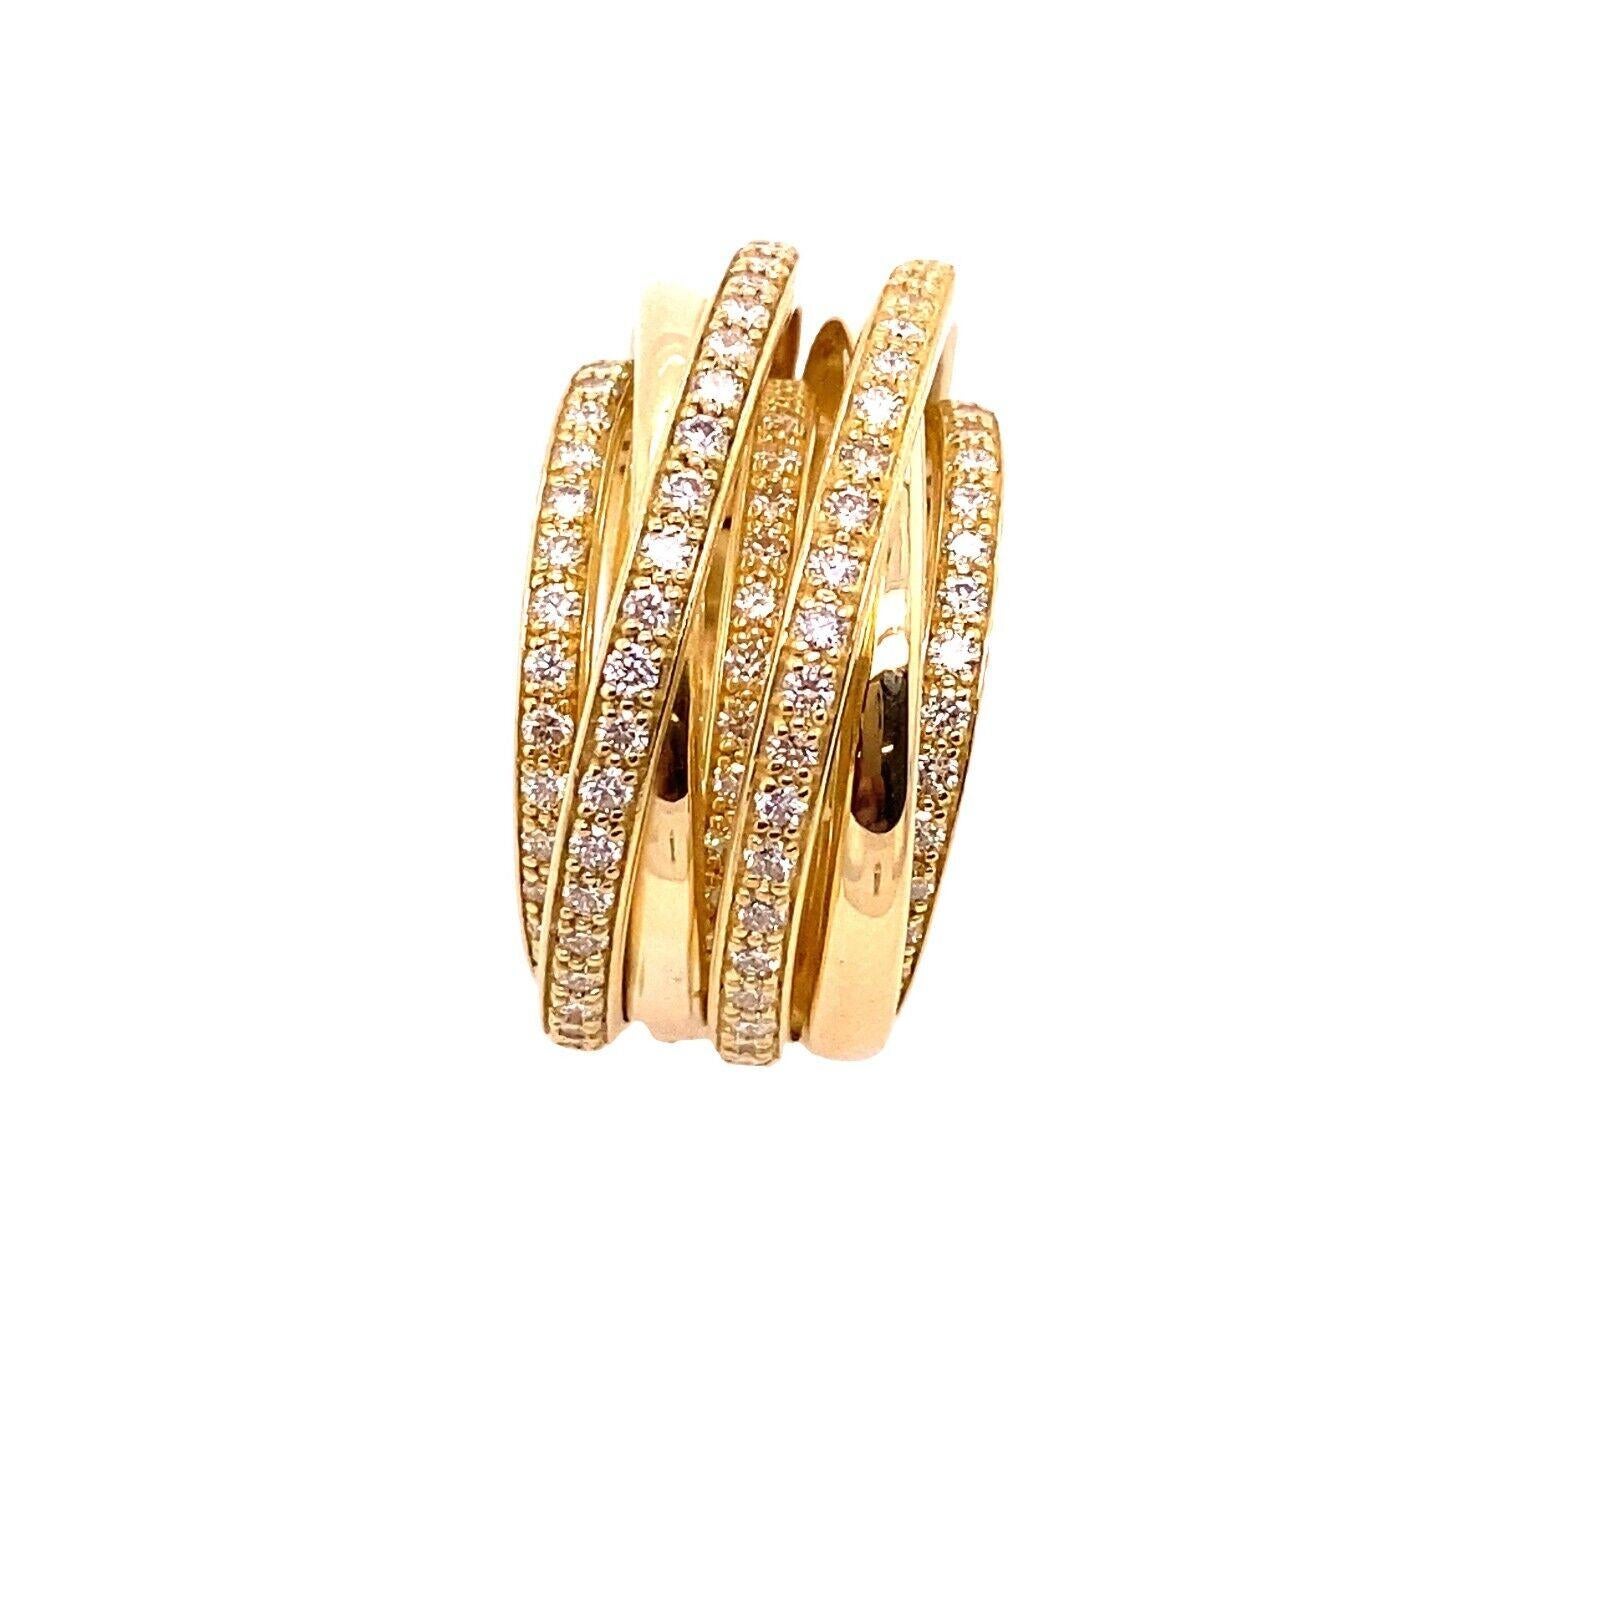 This is a multi strand 18ct Yellow Gold dress ring with 1.76ct Diamonds, which is very beautiful, elegant and fashion. 

Additional Information: 
Total Diamond Weight: 1.76ct White Diamond
Colour: F
White Diamond Clarity: VS
Width of Band: